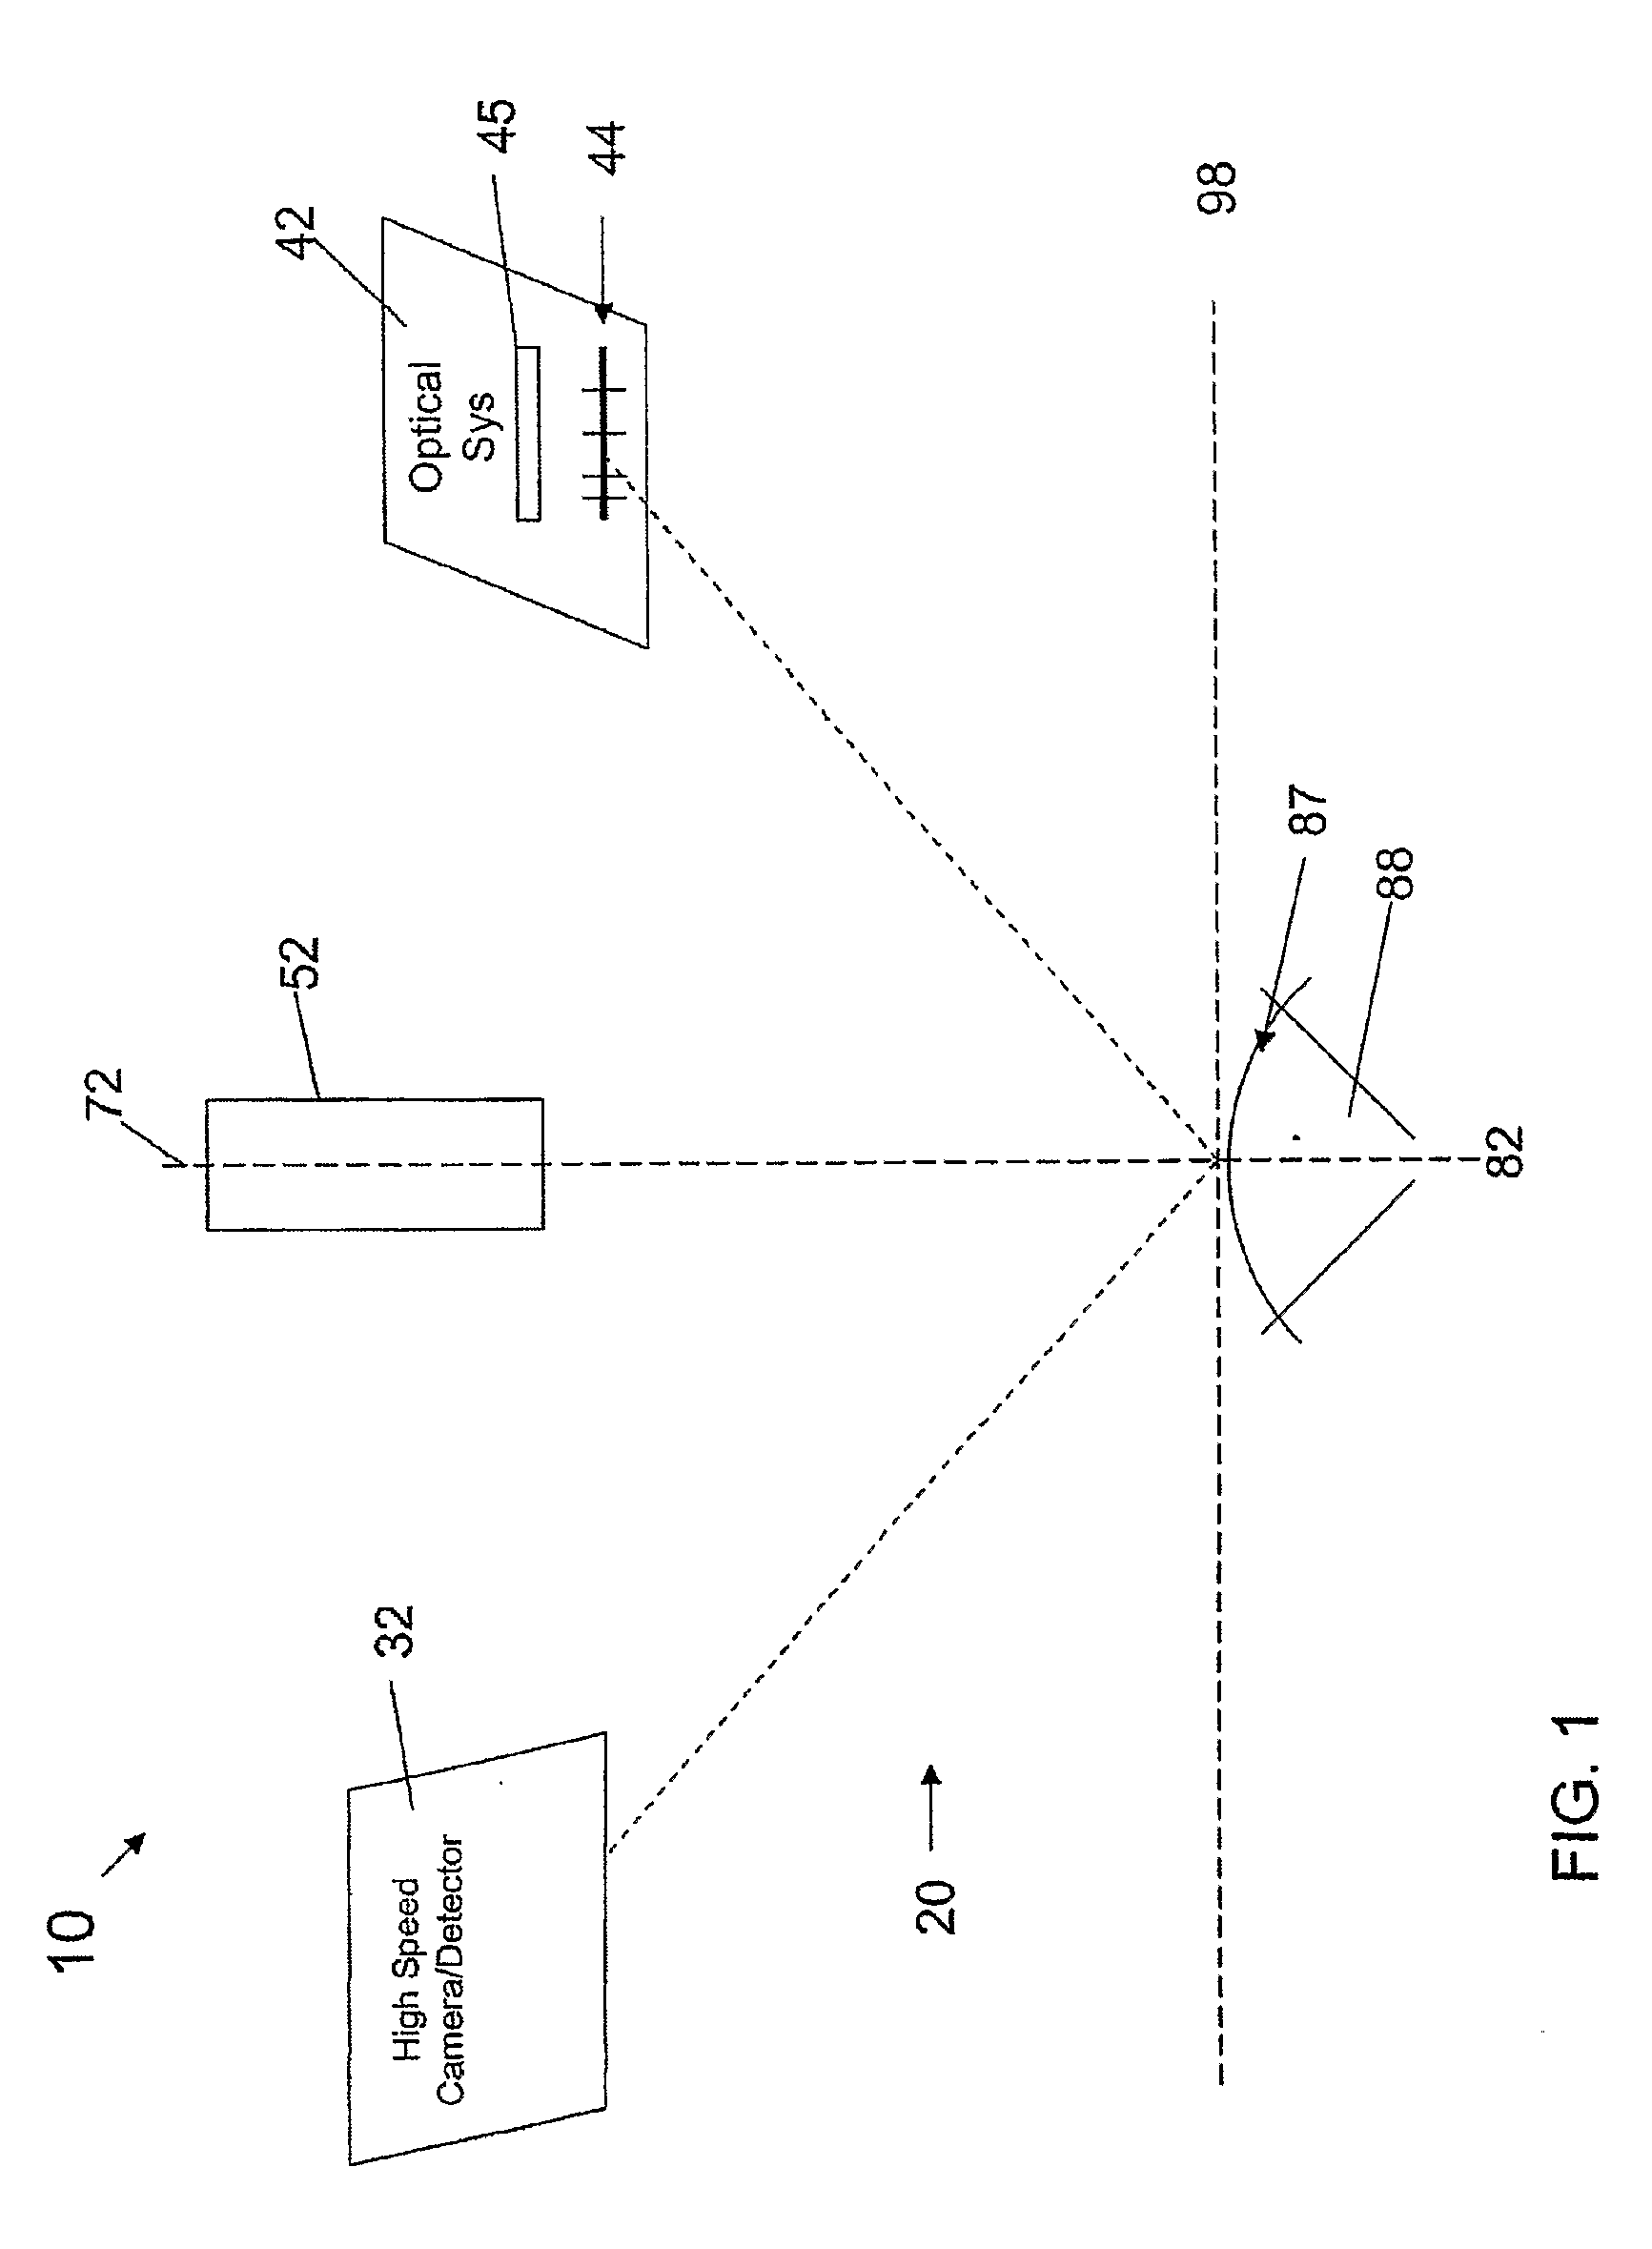 Method and Apparatus For Measuring the Deformation Characteristics of an Object